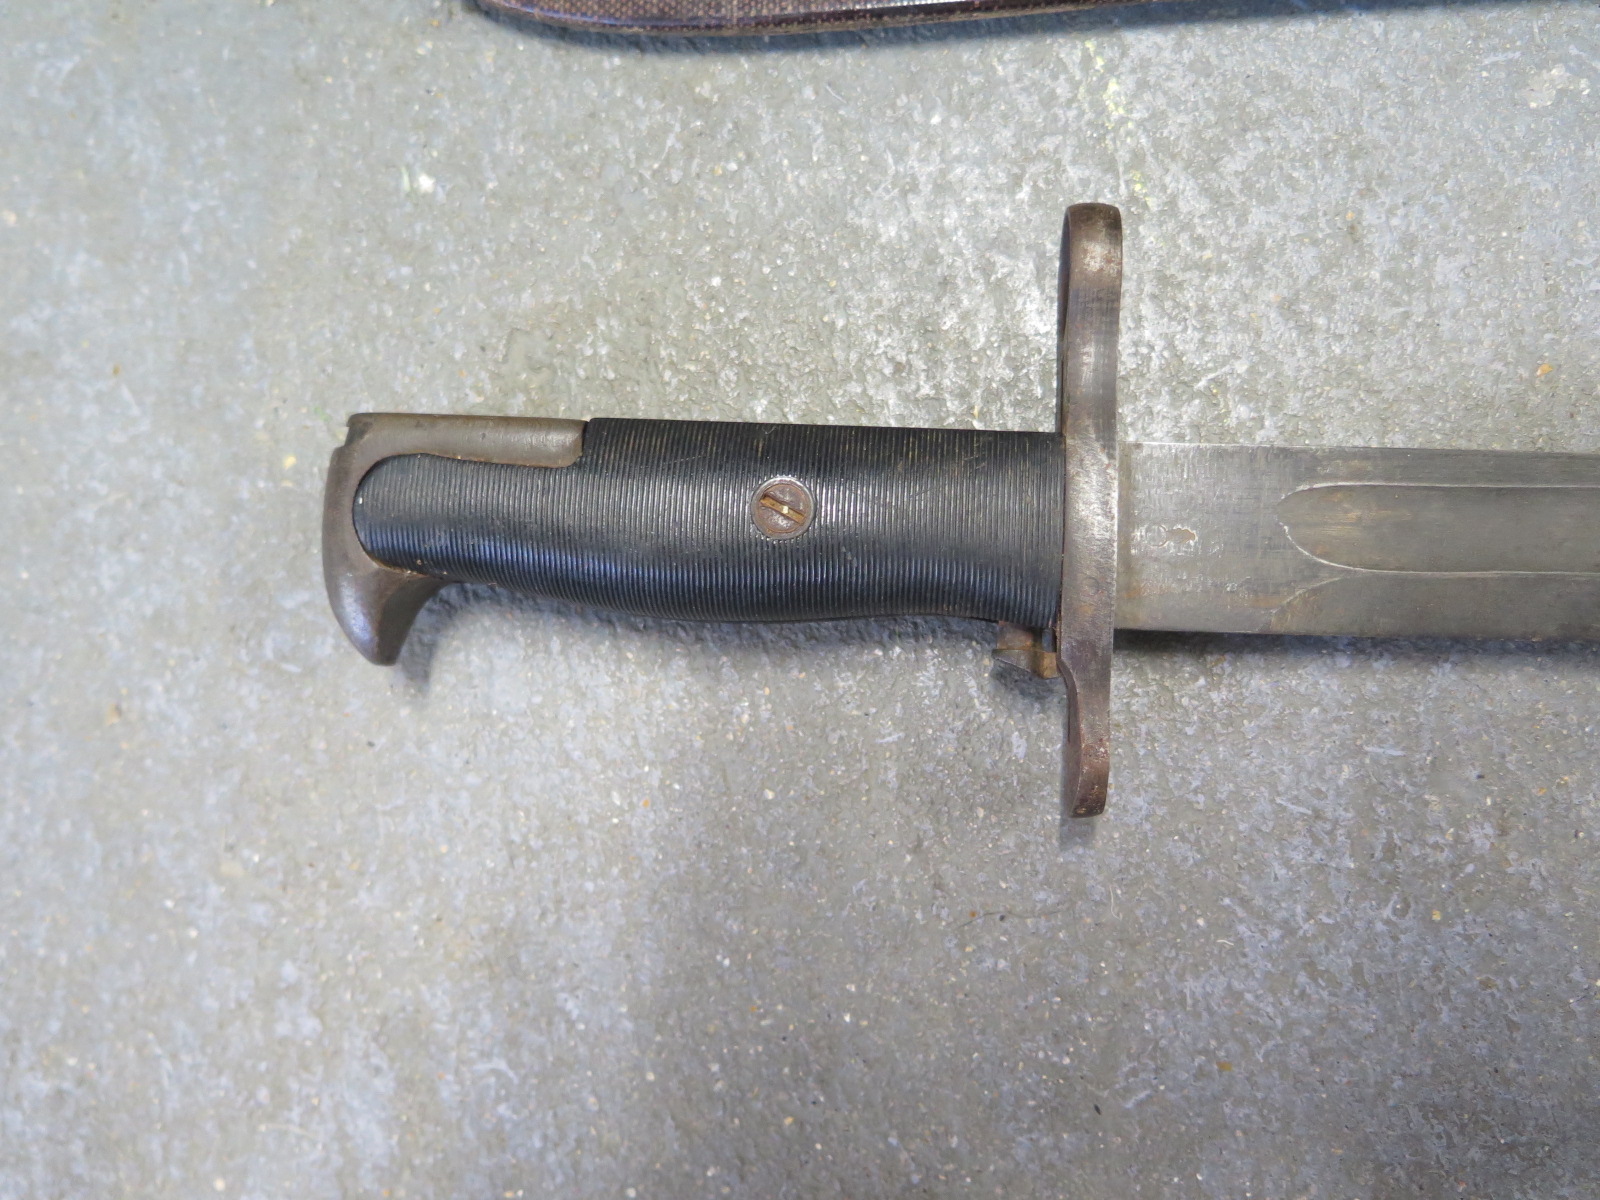 A 1942 US U.F.H. bayonet with original scabbard - total length 51. - Image 2 of 4